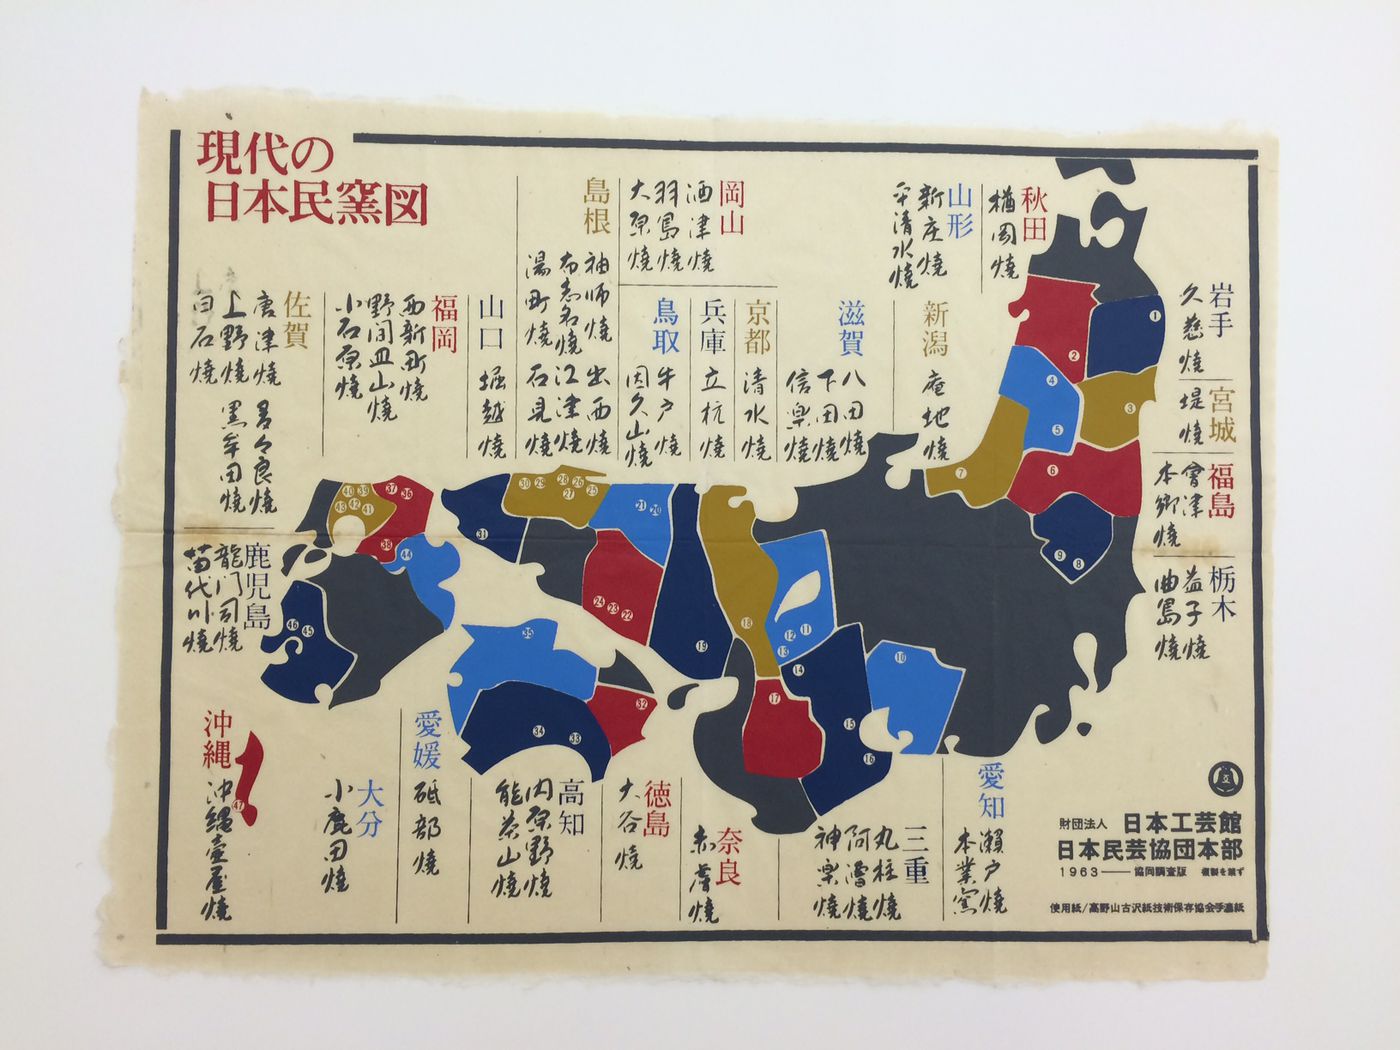 Map of Japan with text in Japanese